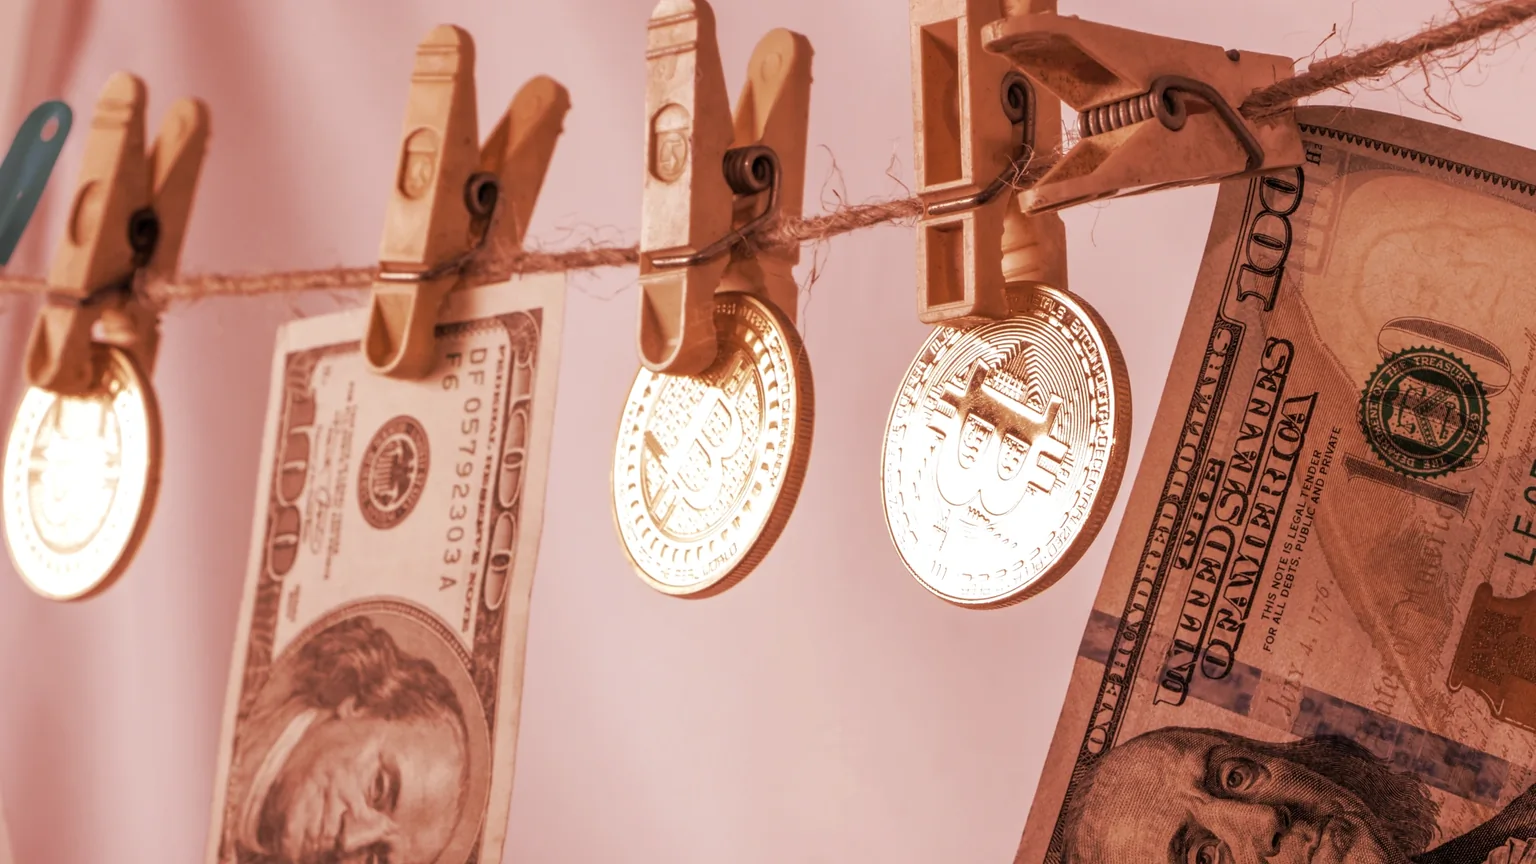 Money laundering is a big issue for the crypto industry. Image: Shutterstock